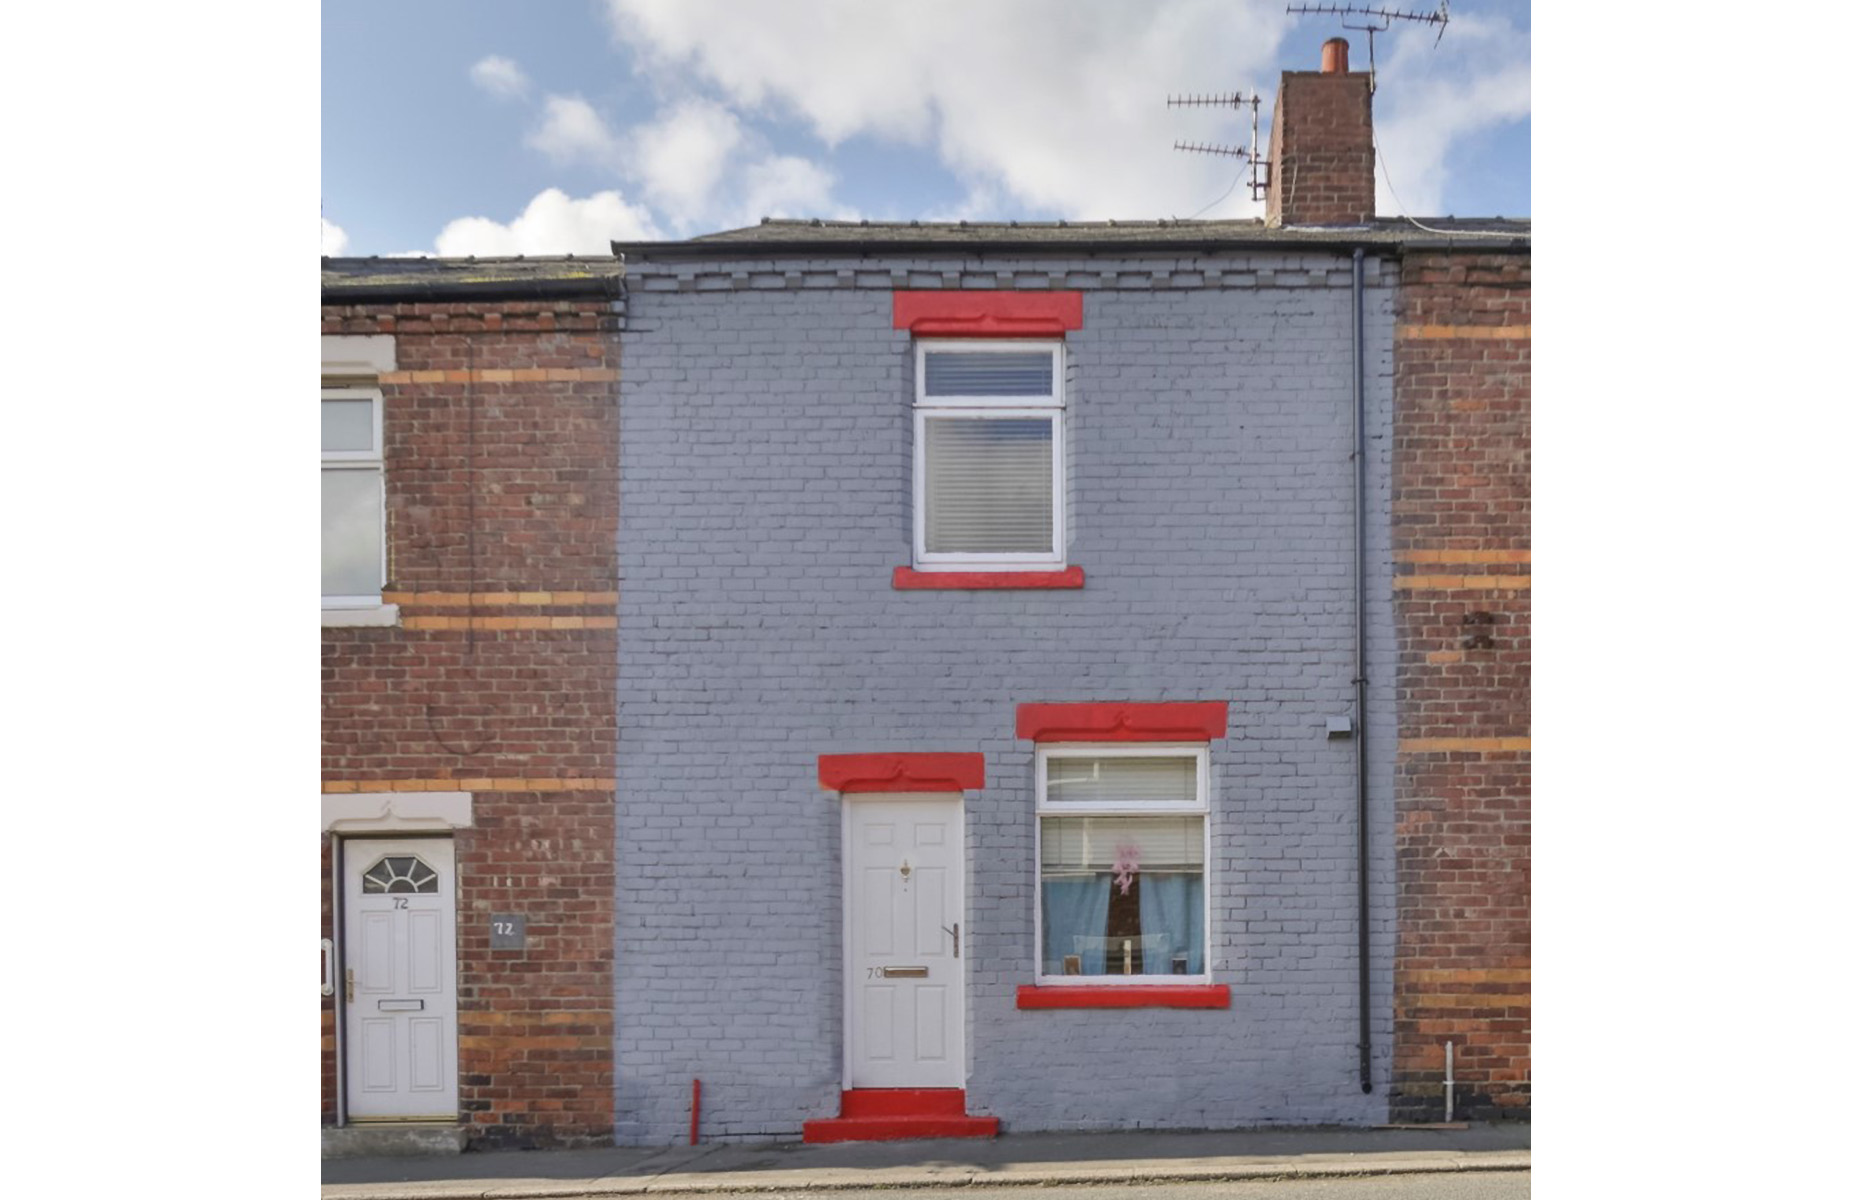 Located in County Durham, this distinctive property features a quirky, colourful facade. Image: Auction House